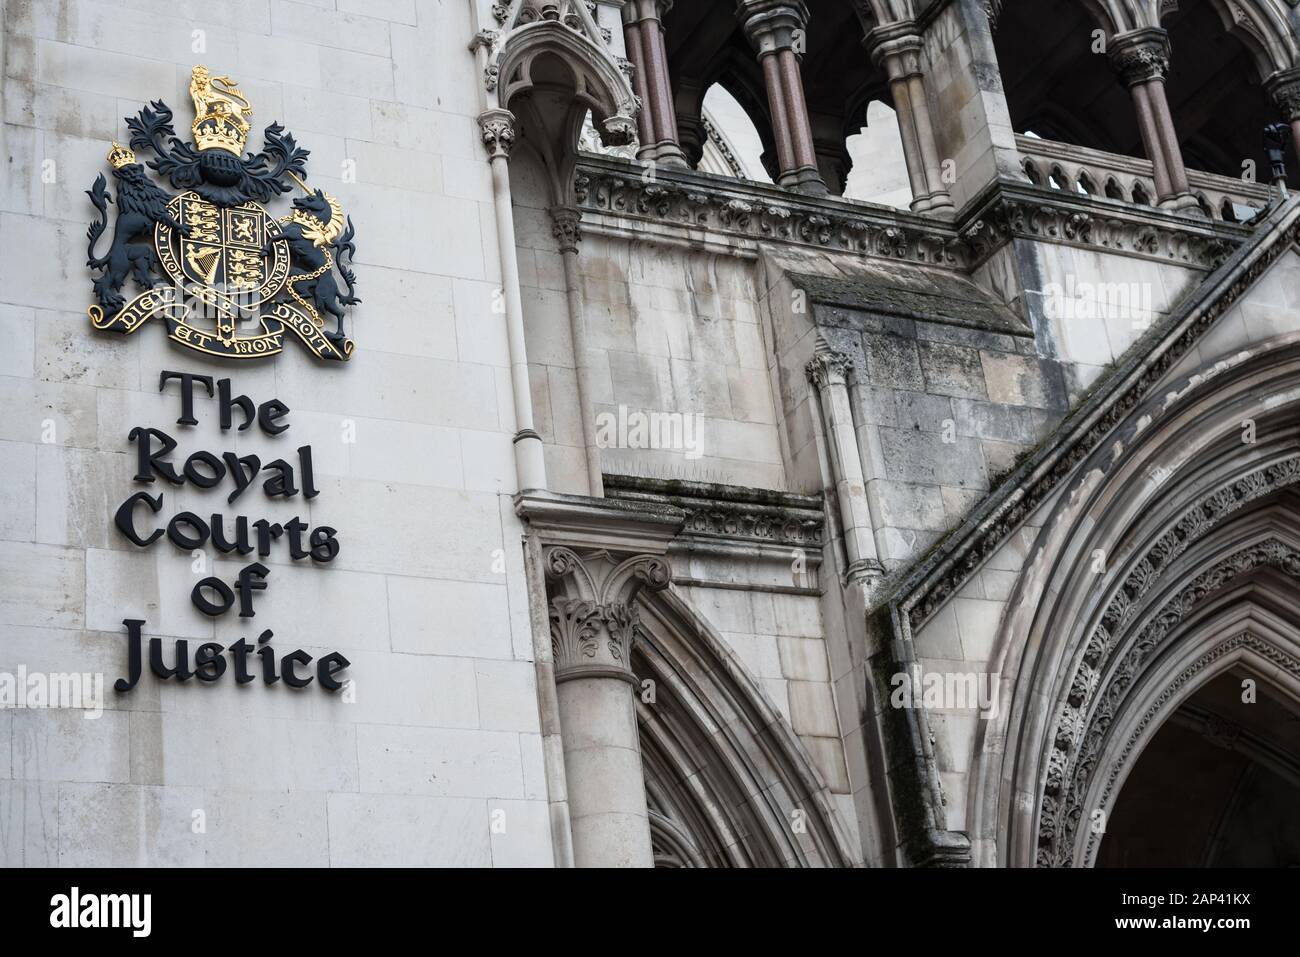 London, UK - Jan 16, 2020:  The front of The Royal Courts of Justice in  London Stock Photo